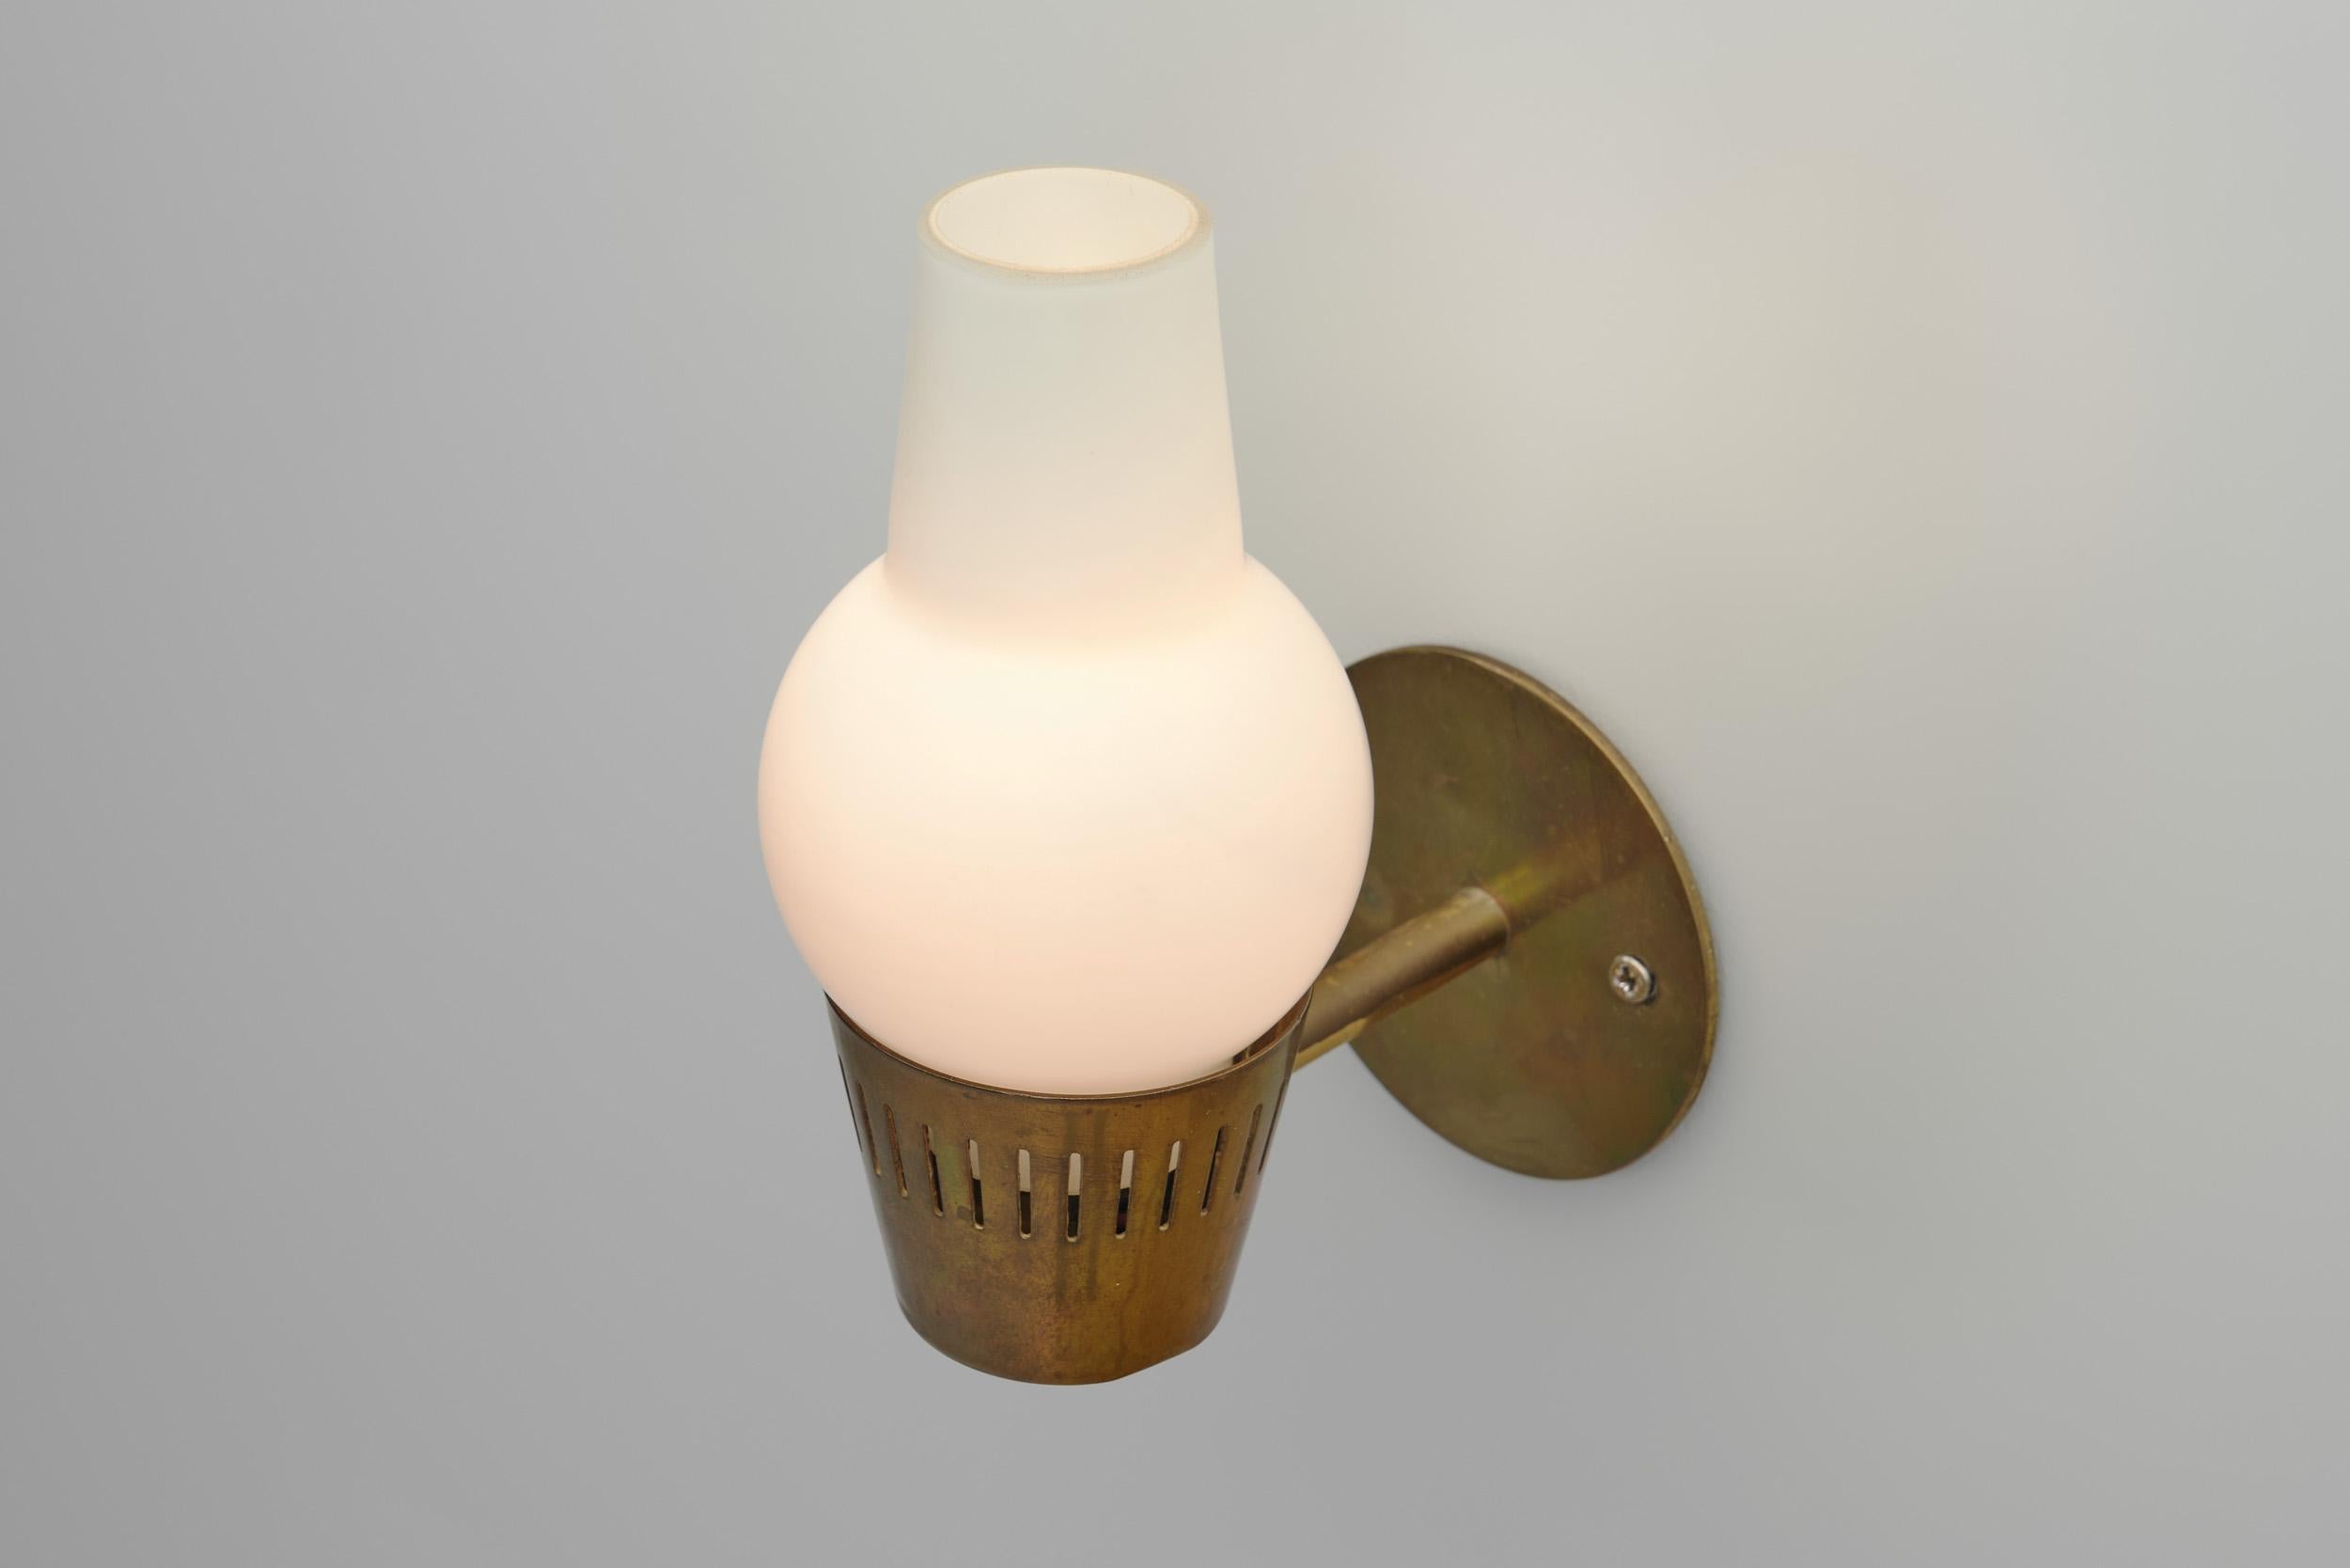 European Modern Brass and Opaque Matte Glass Wall Lamps, Europe 1960s For Sale 6